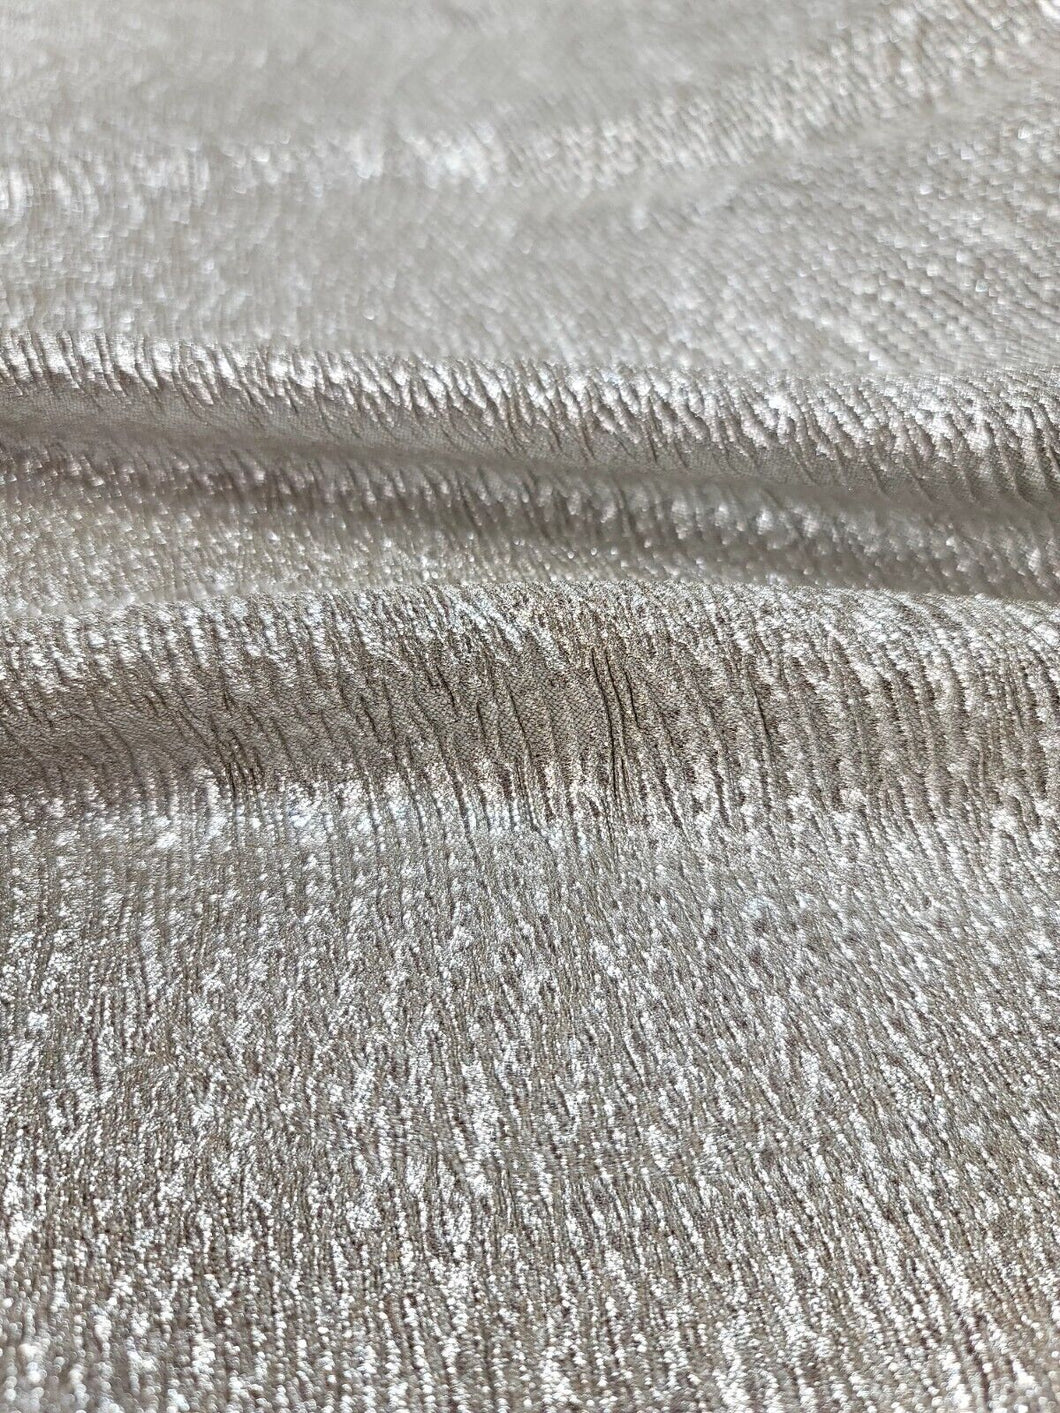 Metallic Shiny Foil on Stretch Textured Spandex Fabric Sold By The Yard For Dres